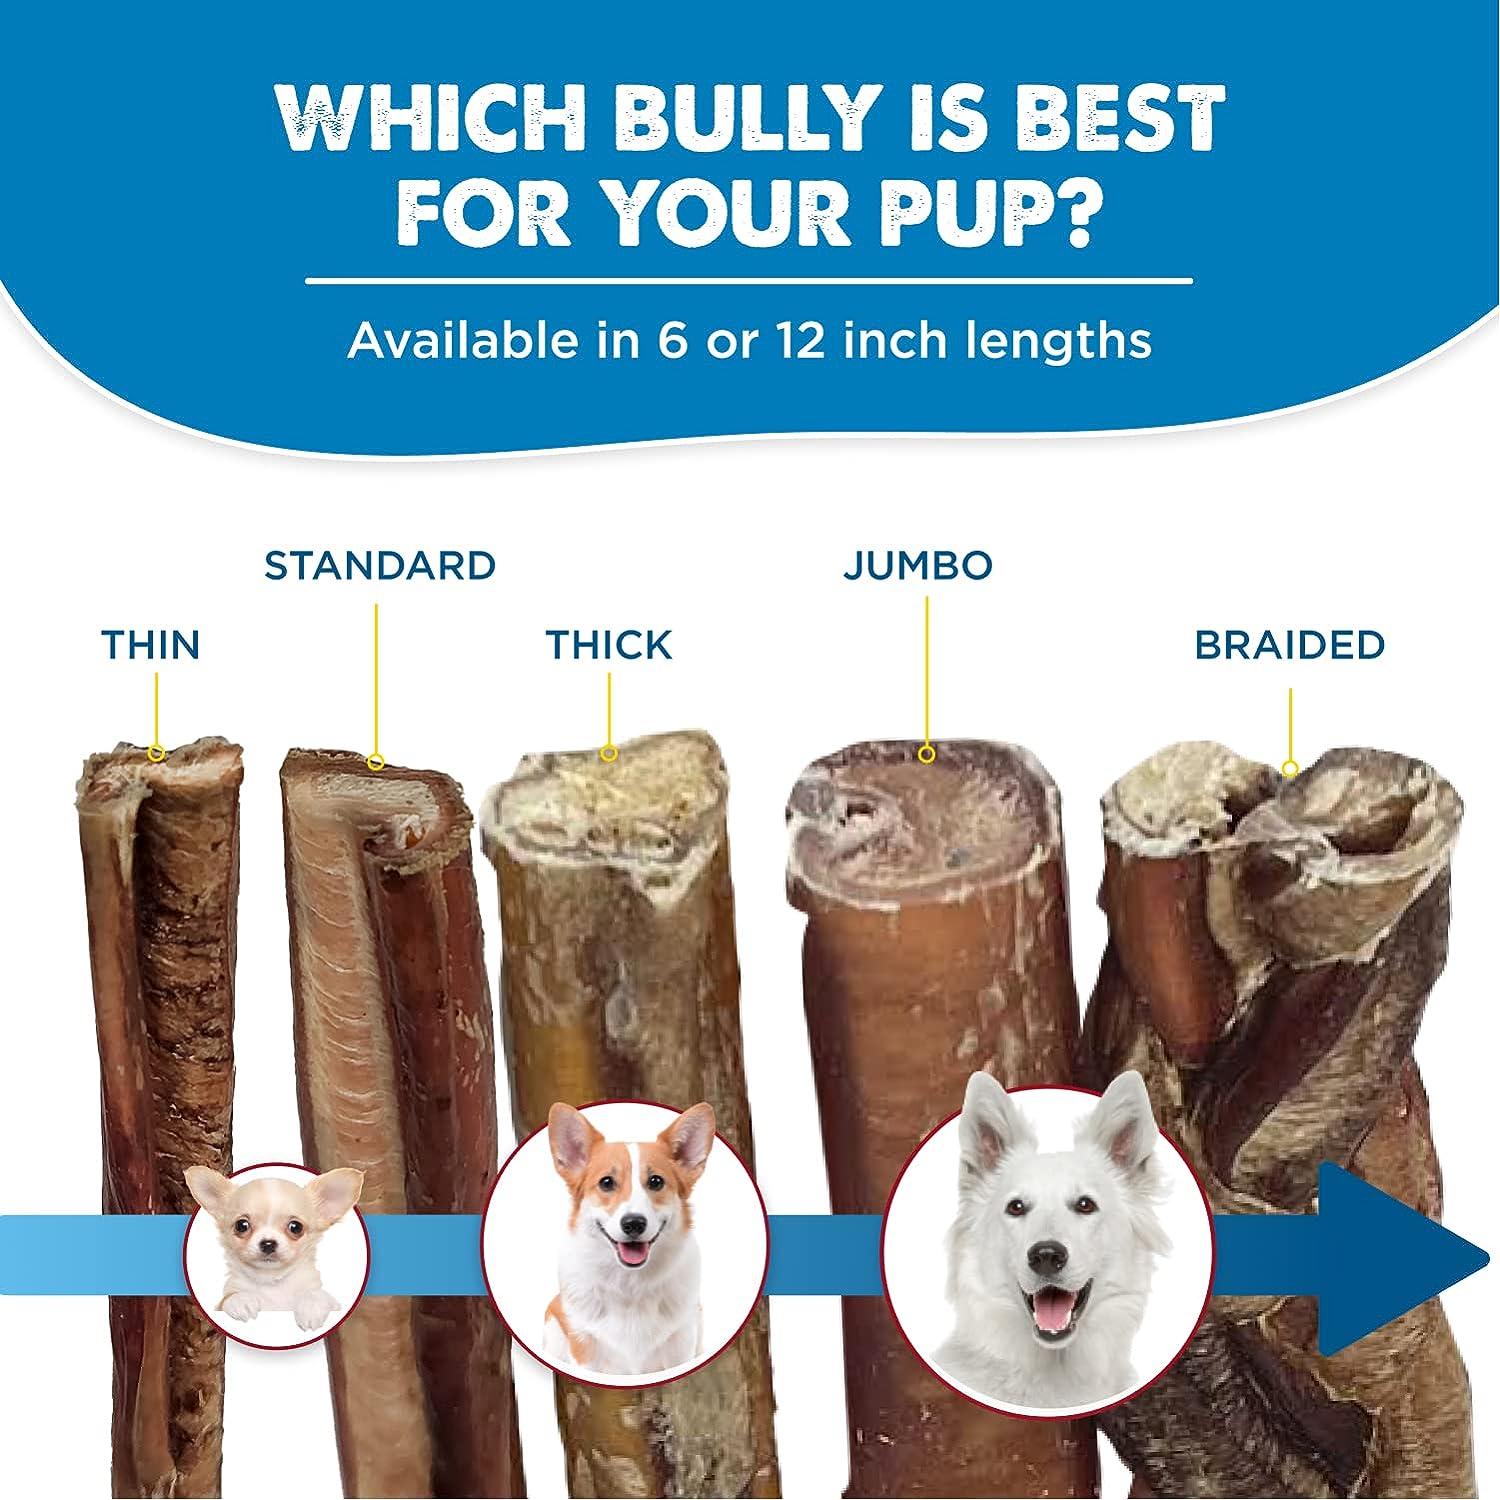 Best Bully Sticks 2-4 Inch Junior Bully Sticks for Dogs - 100% Natural, Grass-Fed Beef, Dog Bully Sticks for Small Dogs, Puppy, Mini Breeds - Grain and Rawhide Free Bully Stick Dog Chews | 8 oz : Pet Supplies